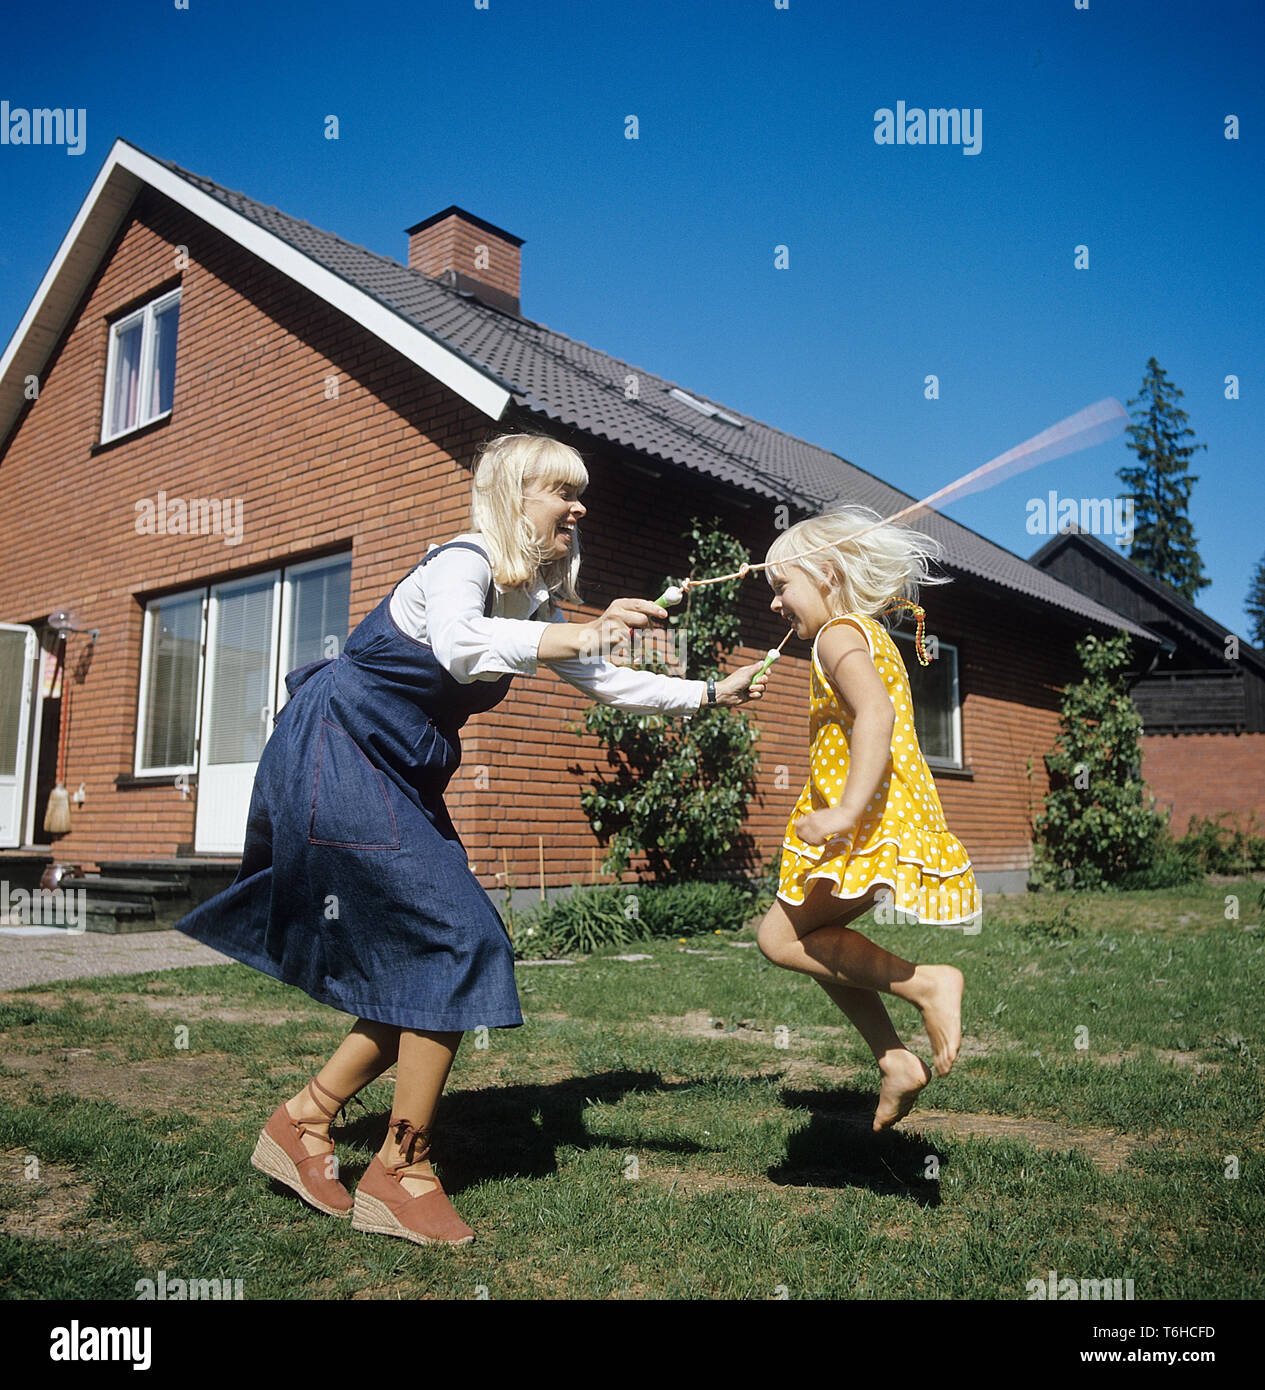 1970s lifestyle. A mother and her daughter is playing together in the garden. They are jumping rope together and laughing. Sweden 1970s. She is actress Margareta Sjödin. Stock Photo